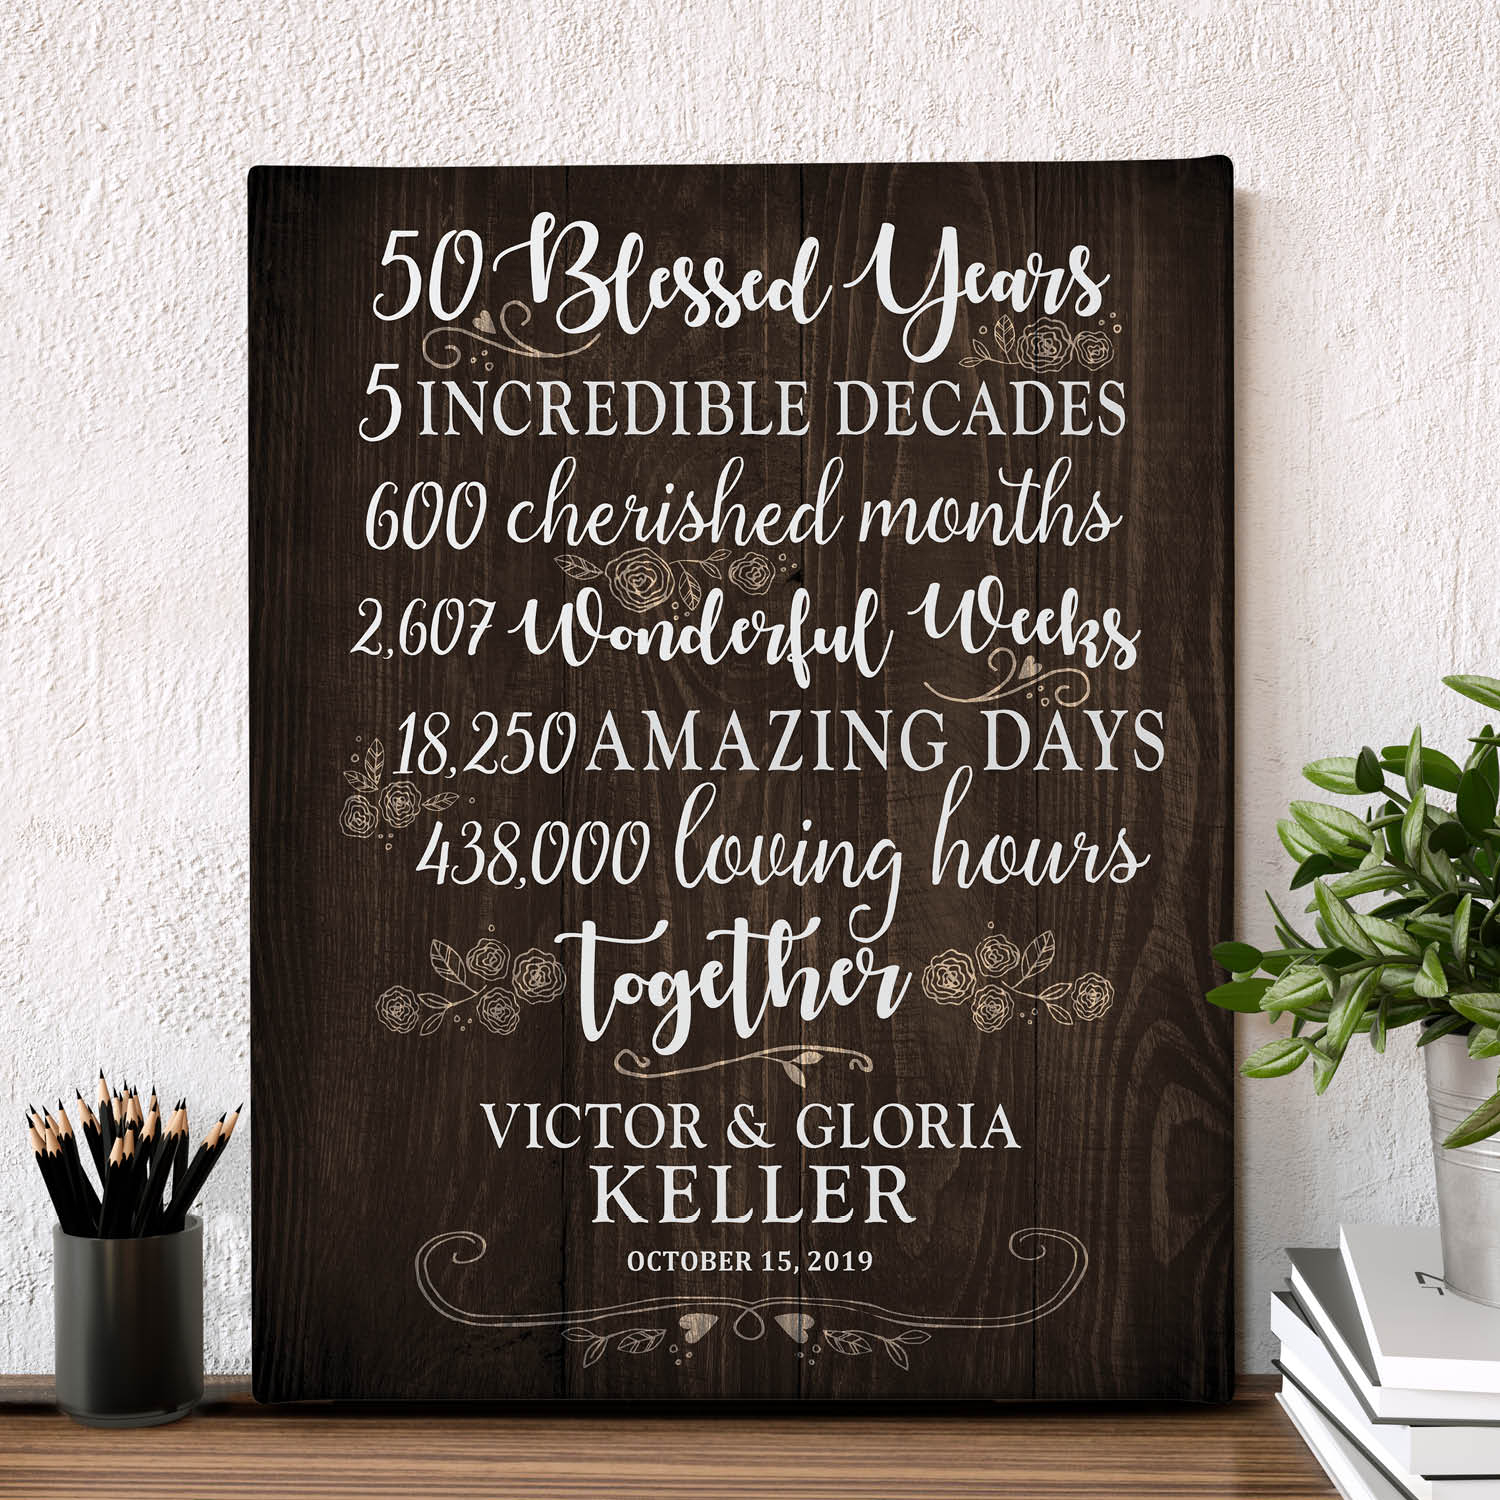 Personalized Planet Canvases - 20'' Brown 'Blessed Years' Personalized Canvas